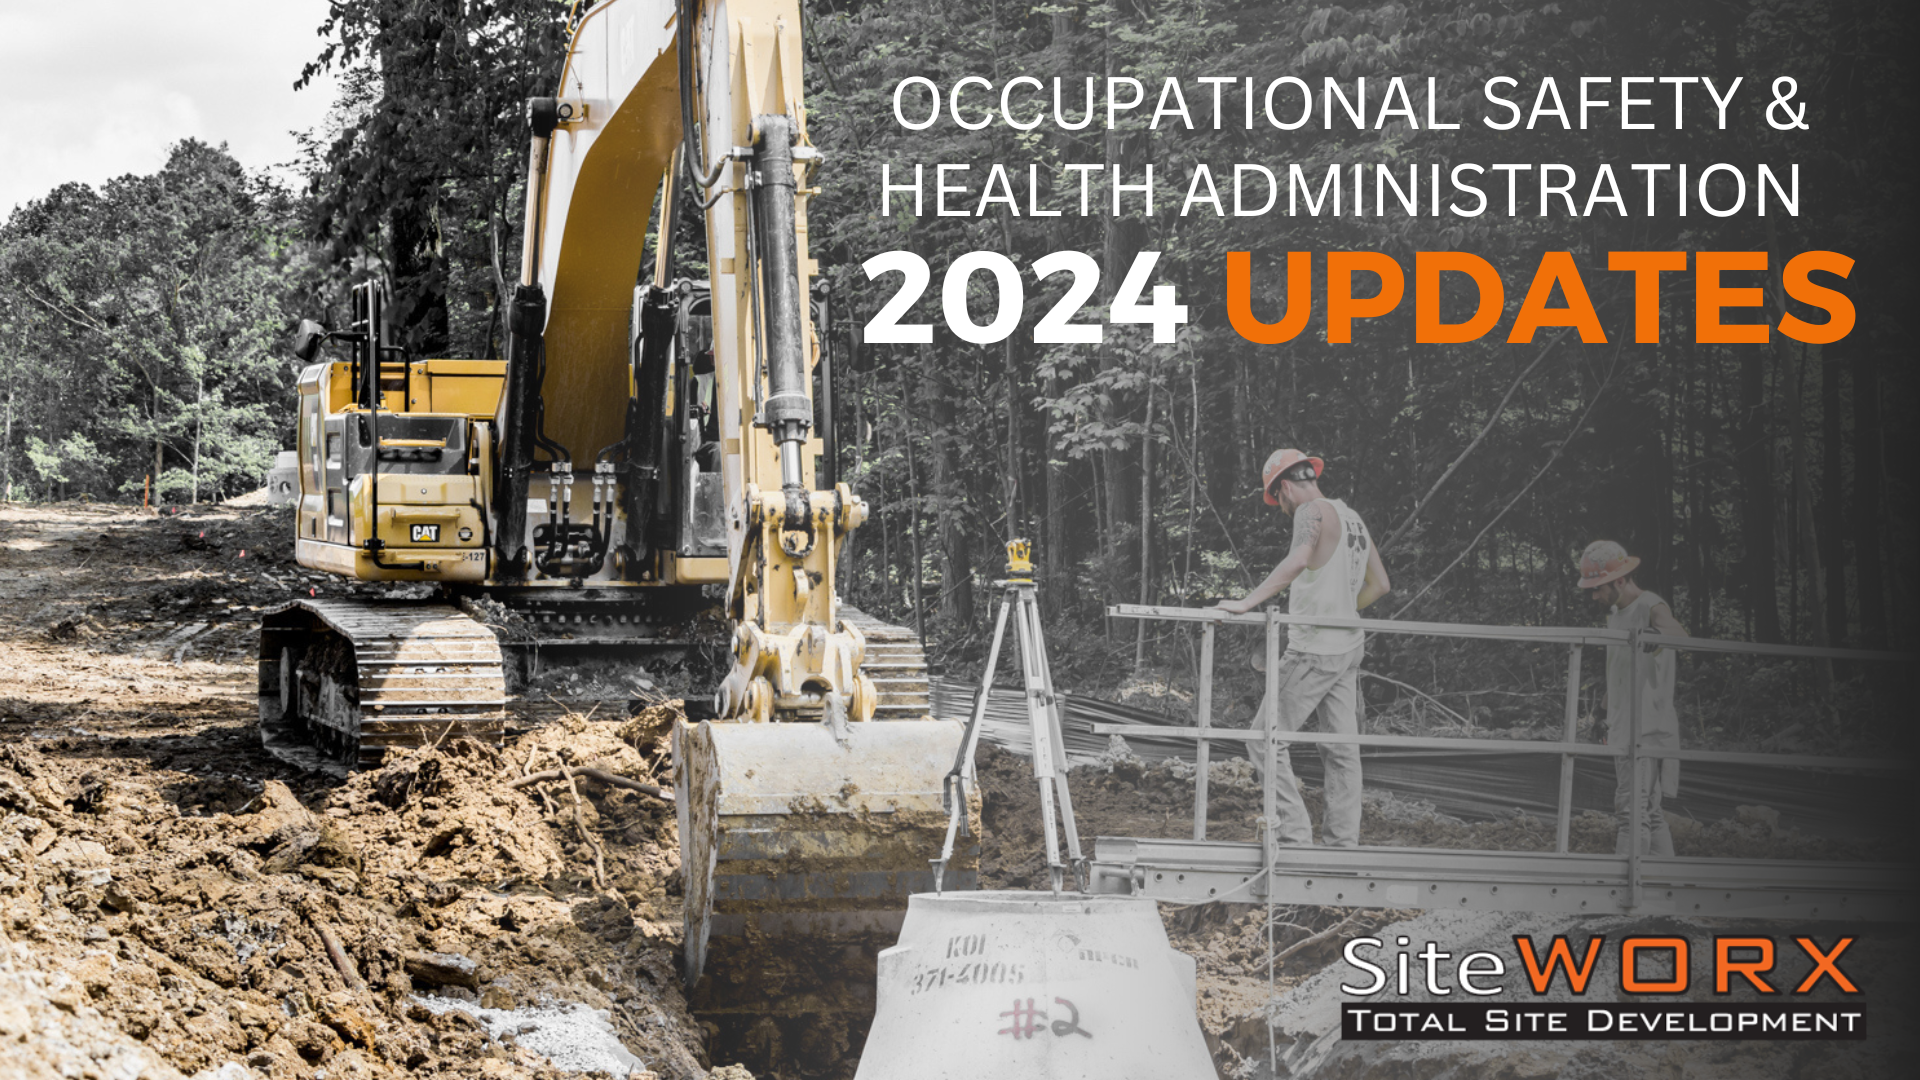 Construction workers on site. The text reads, "Occupational Safety and Health Administration (OSHA) 2024 Updates" 